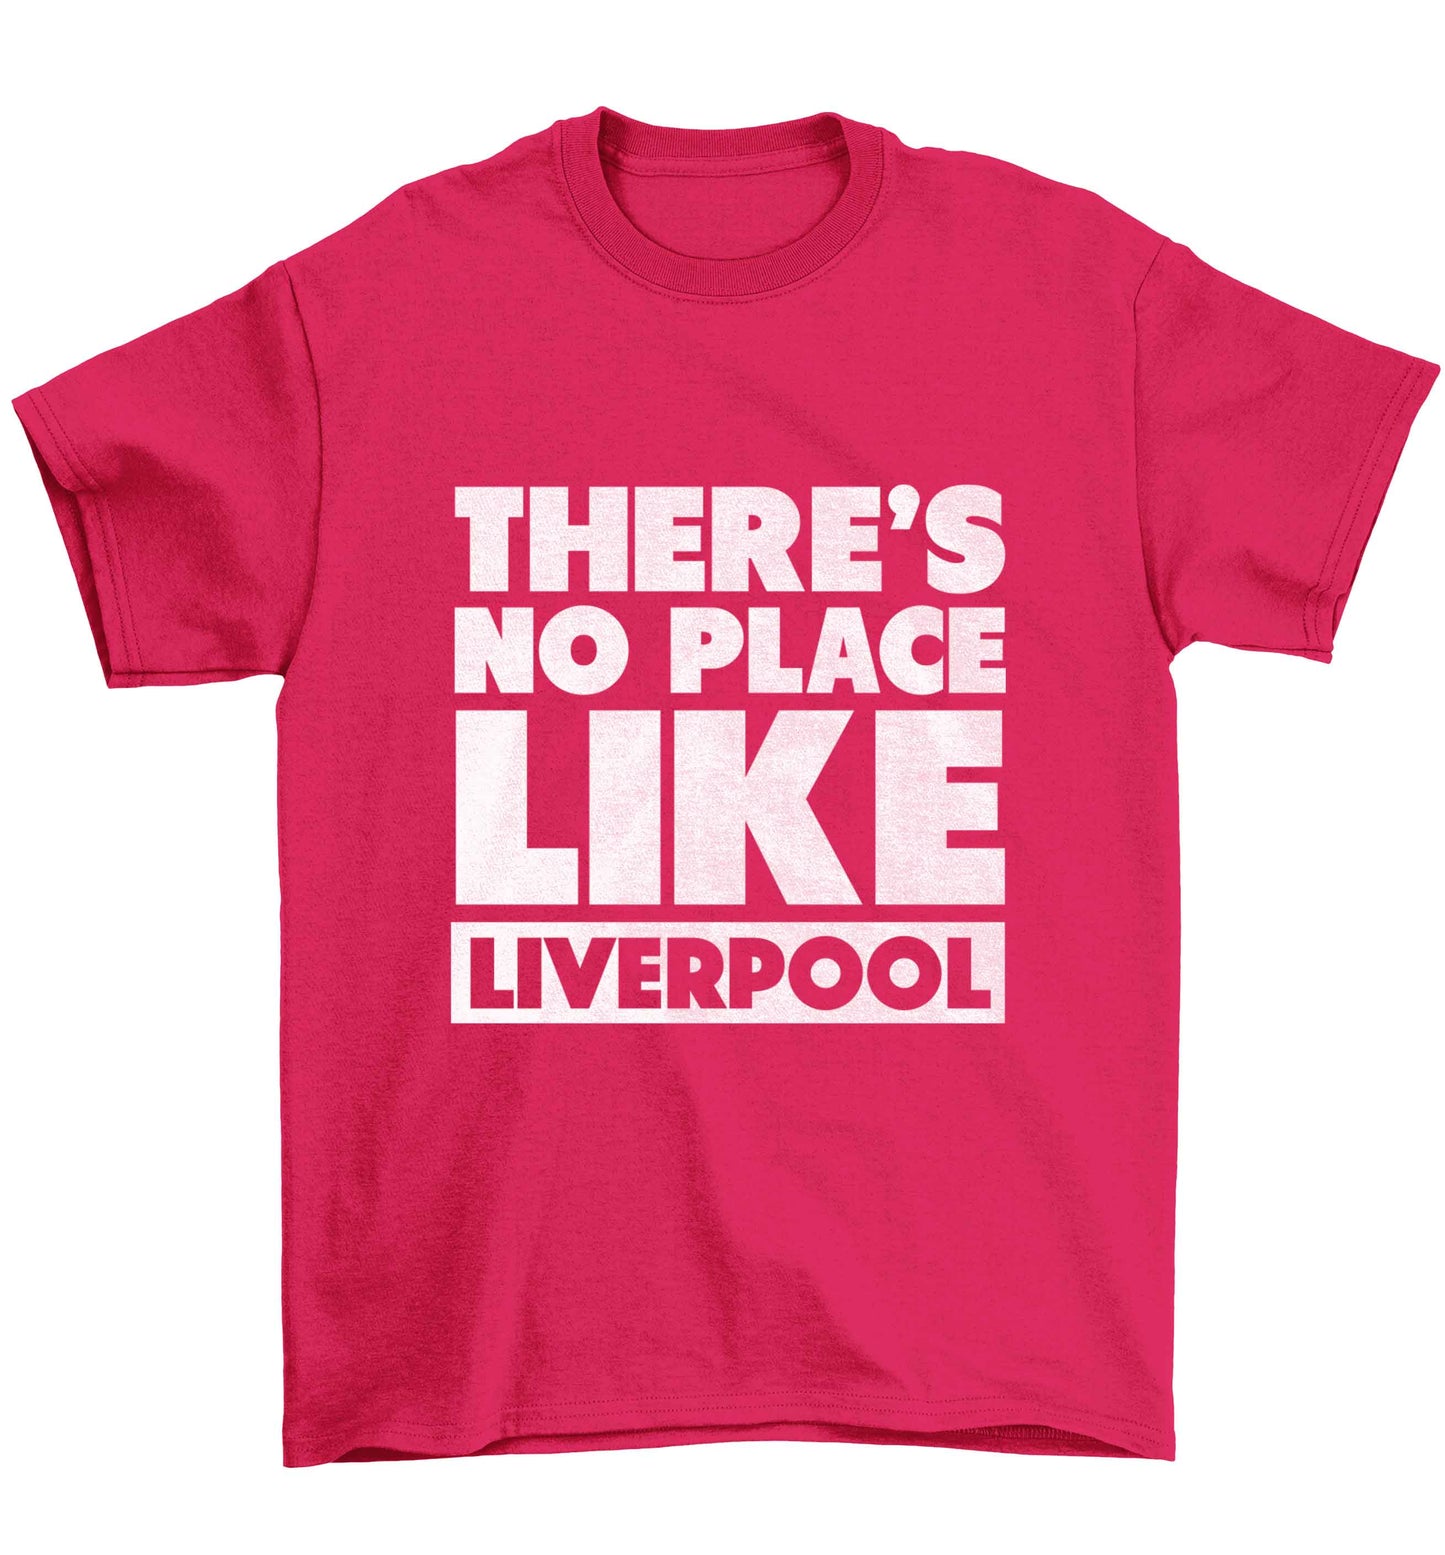 There's no place like Liverpool Children's pink Tshirt 12-13 Years